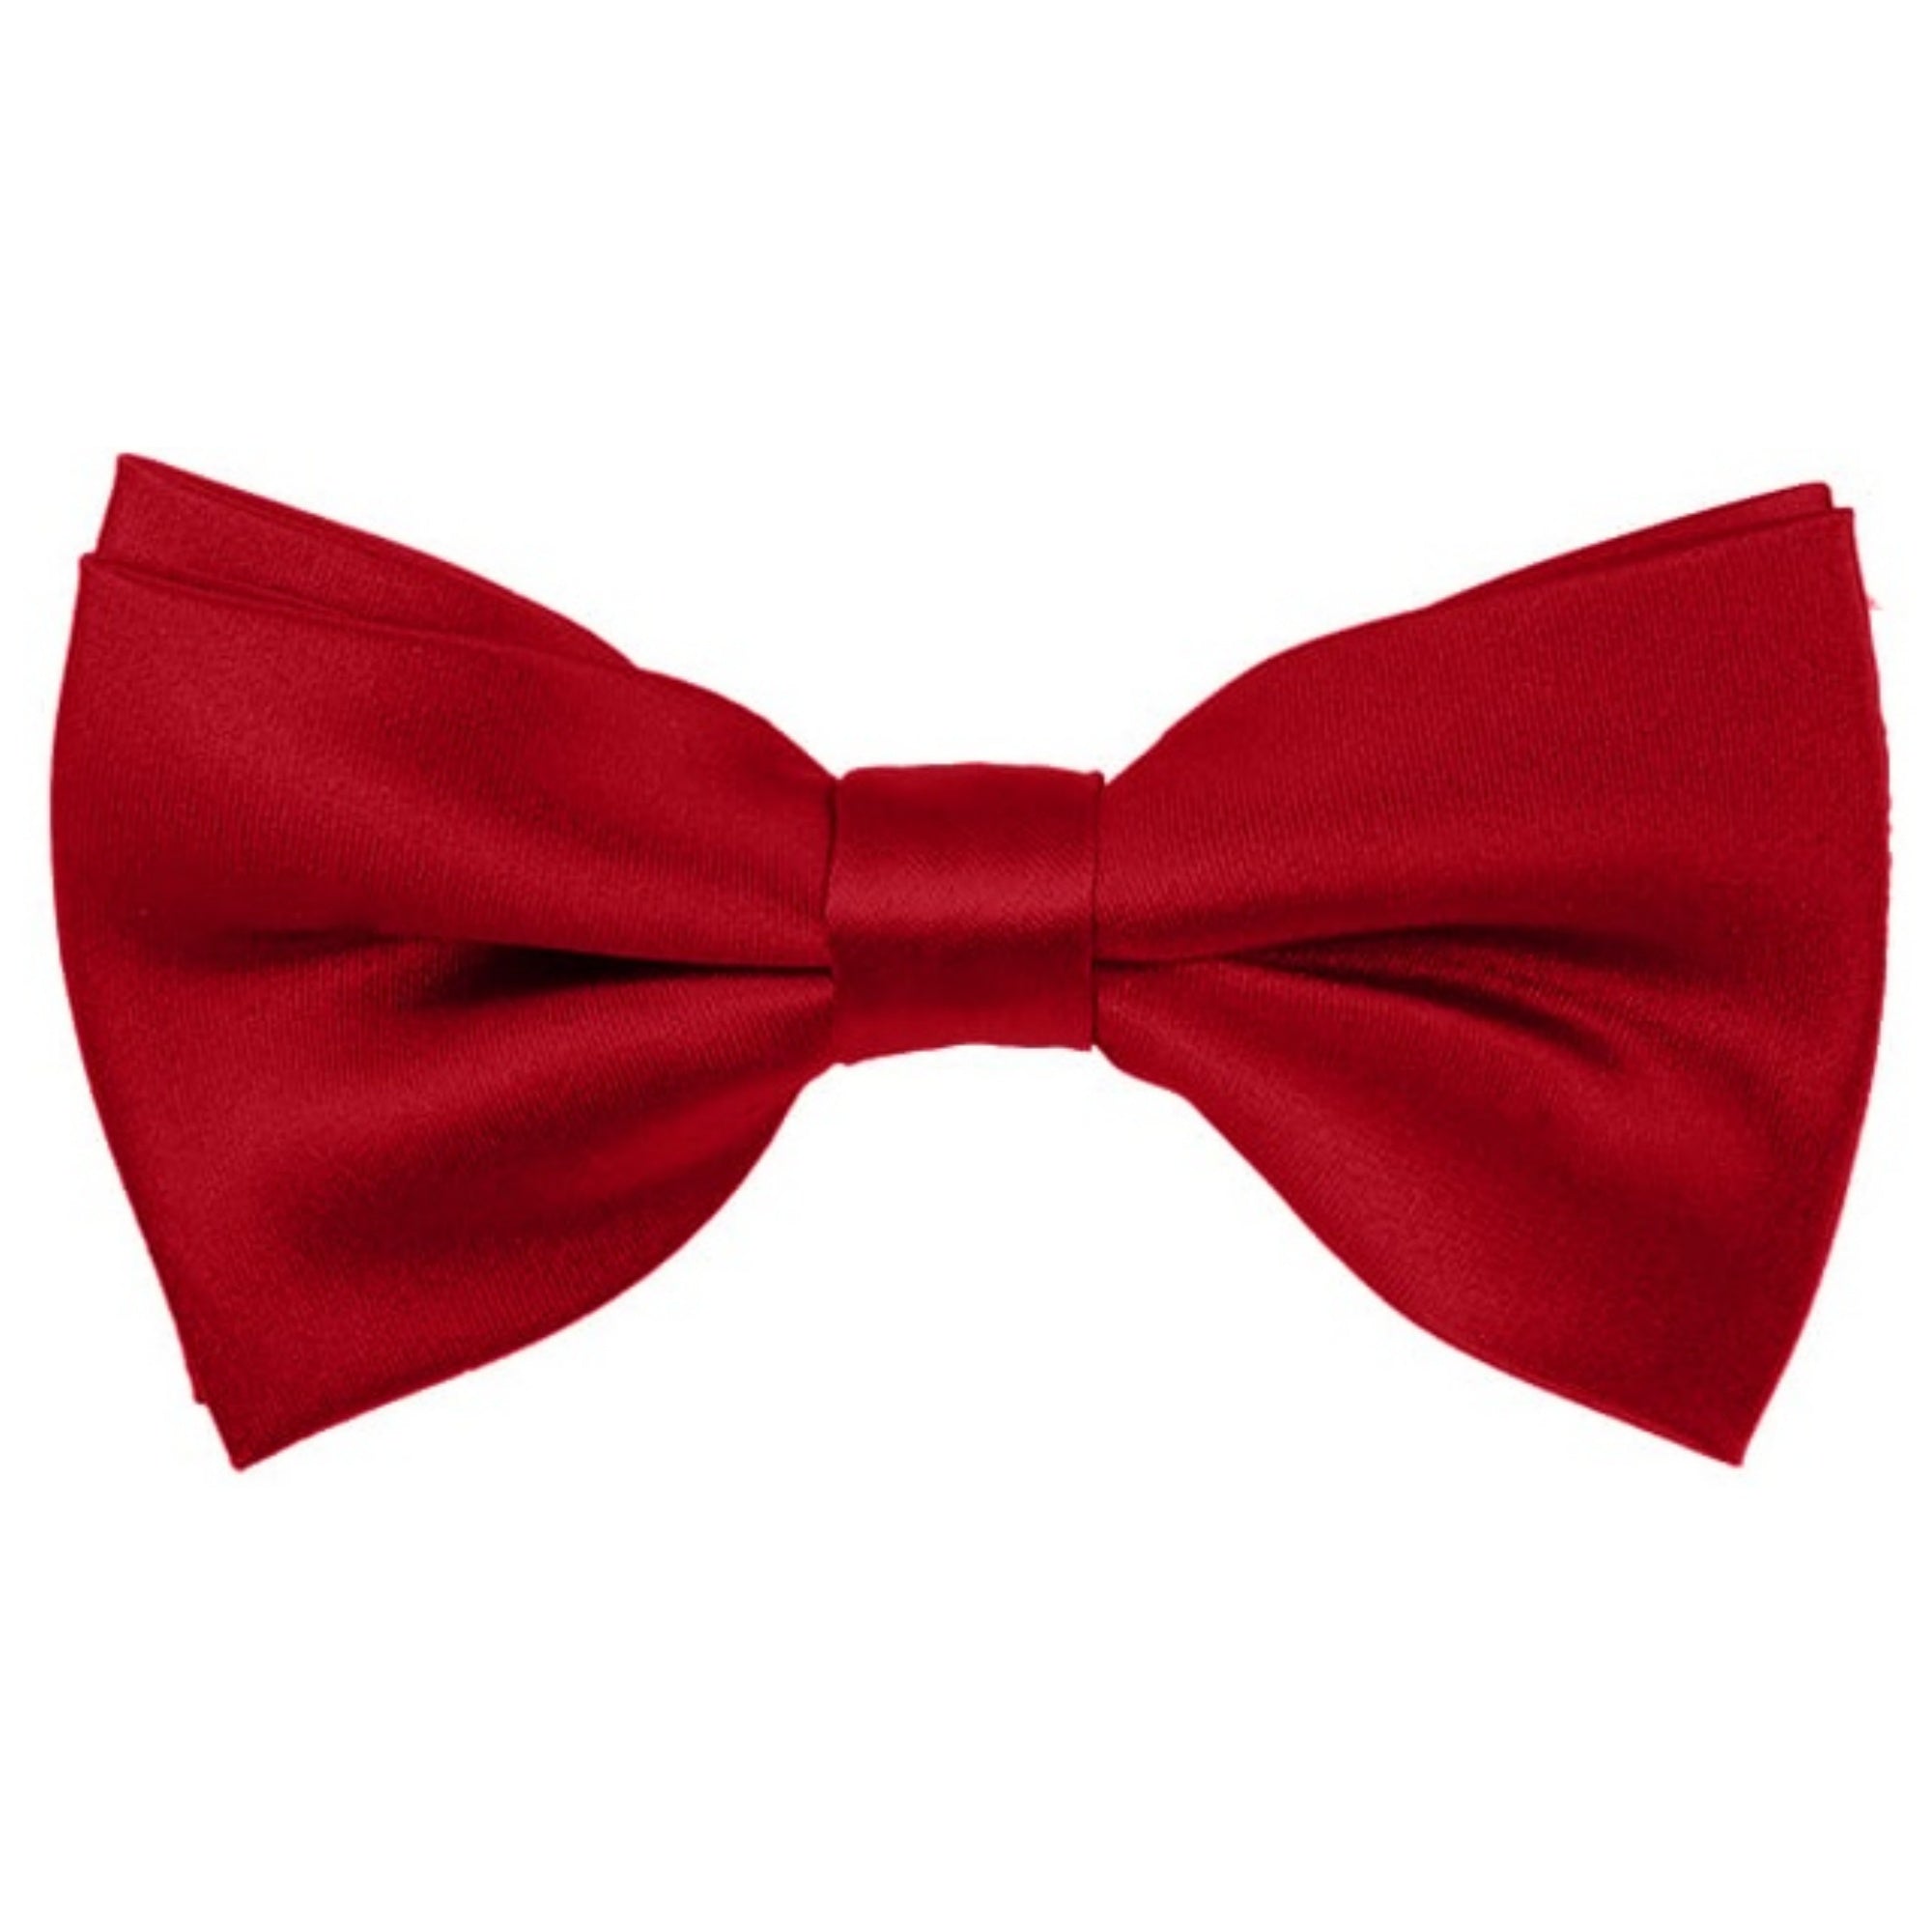 TheDapperTie Men's Solid Color 2.5 W And 4.5 L Inch Pre-Tied adjustable Bow Ties Men's Solid Color Bow Tie TheDapperTie Crimson Red  